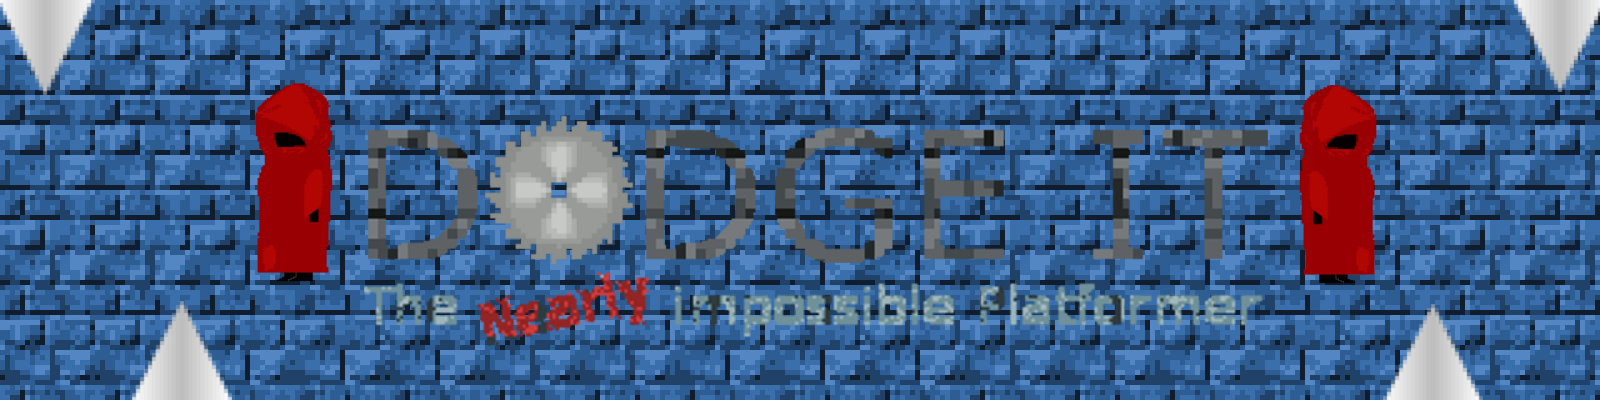 Dodge It: The Nearly Impossible Platformer